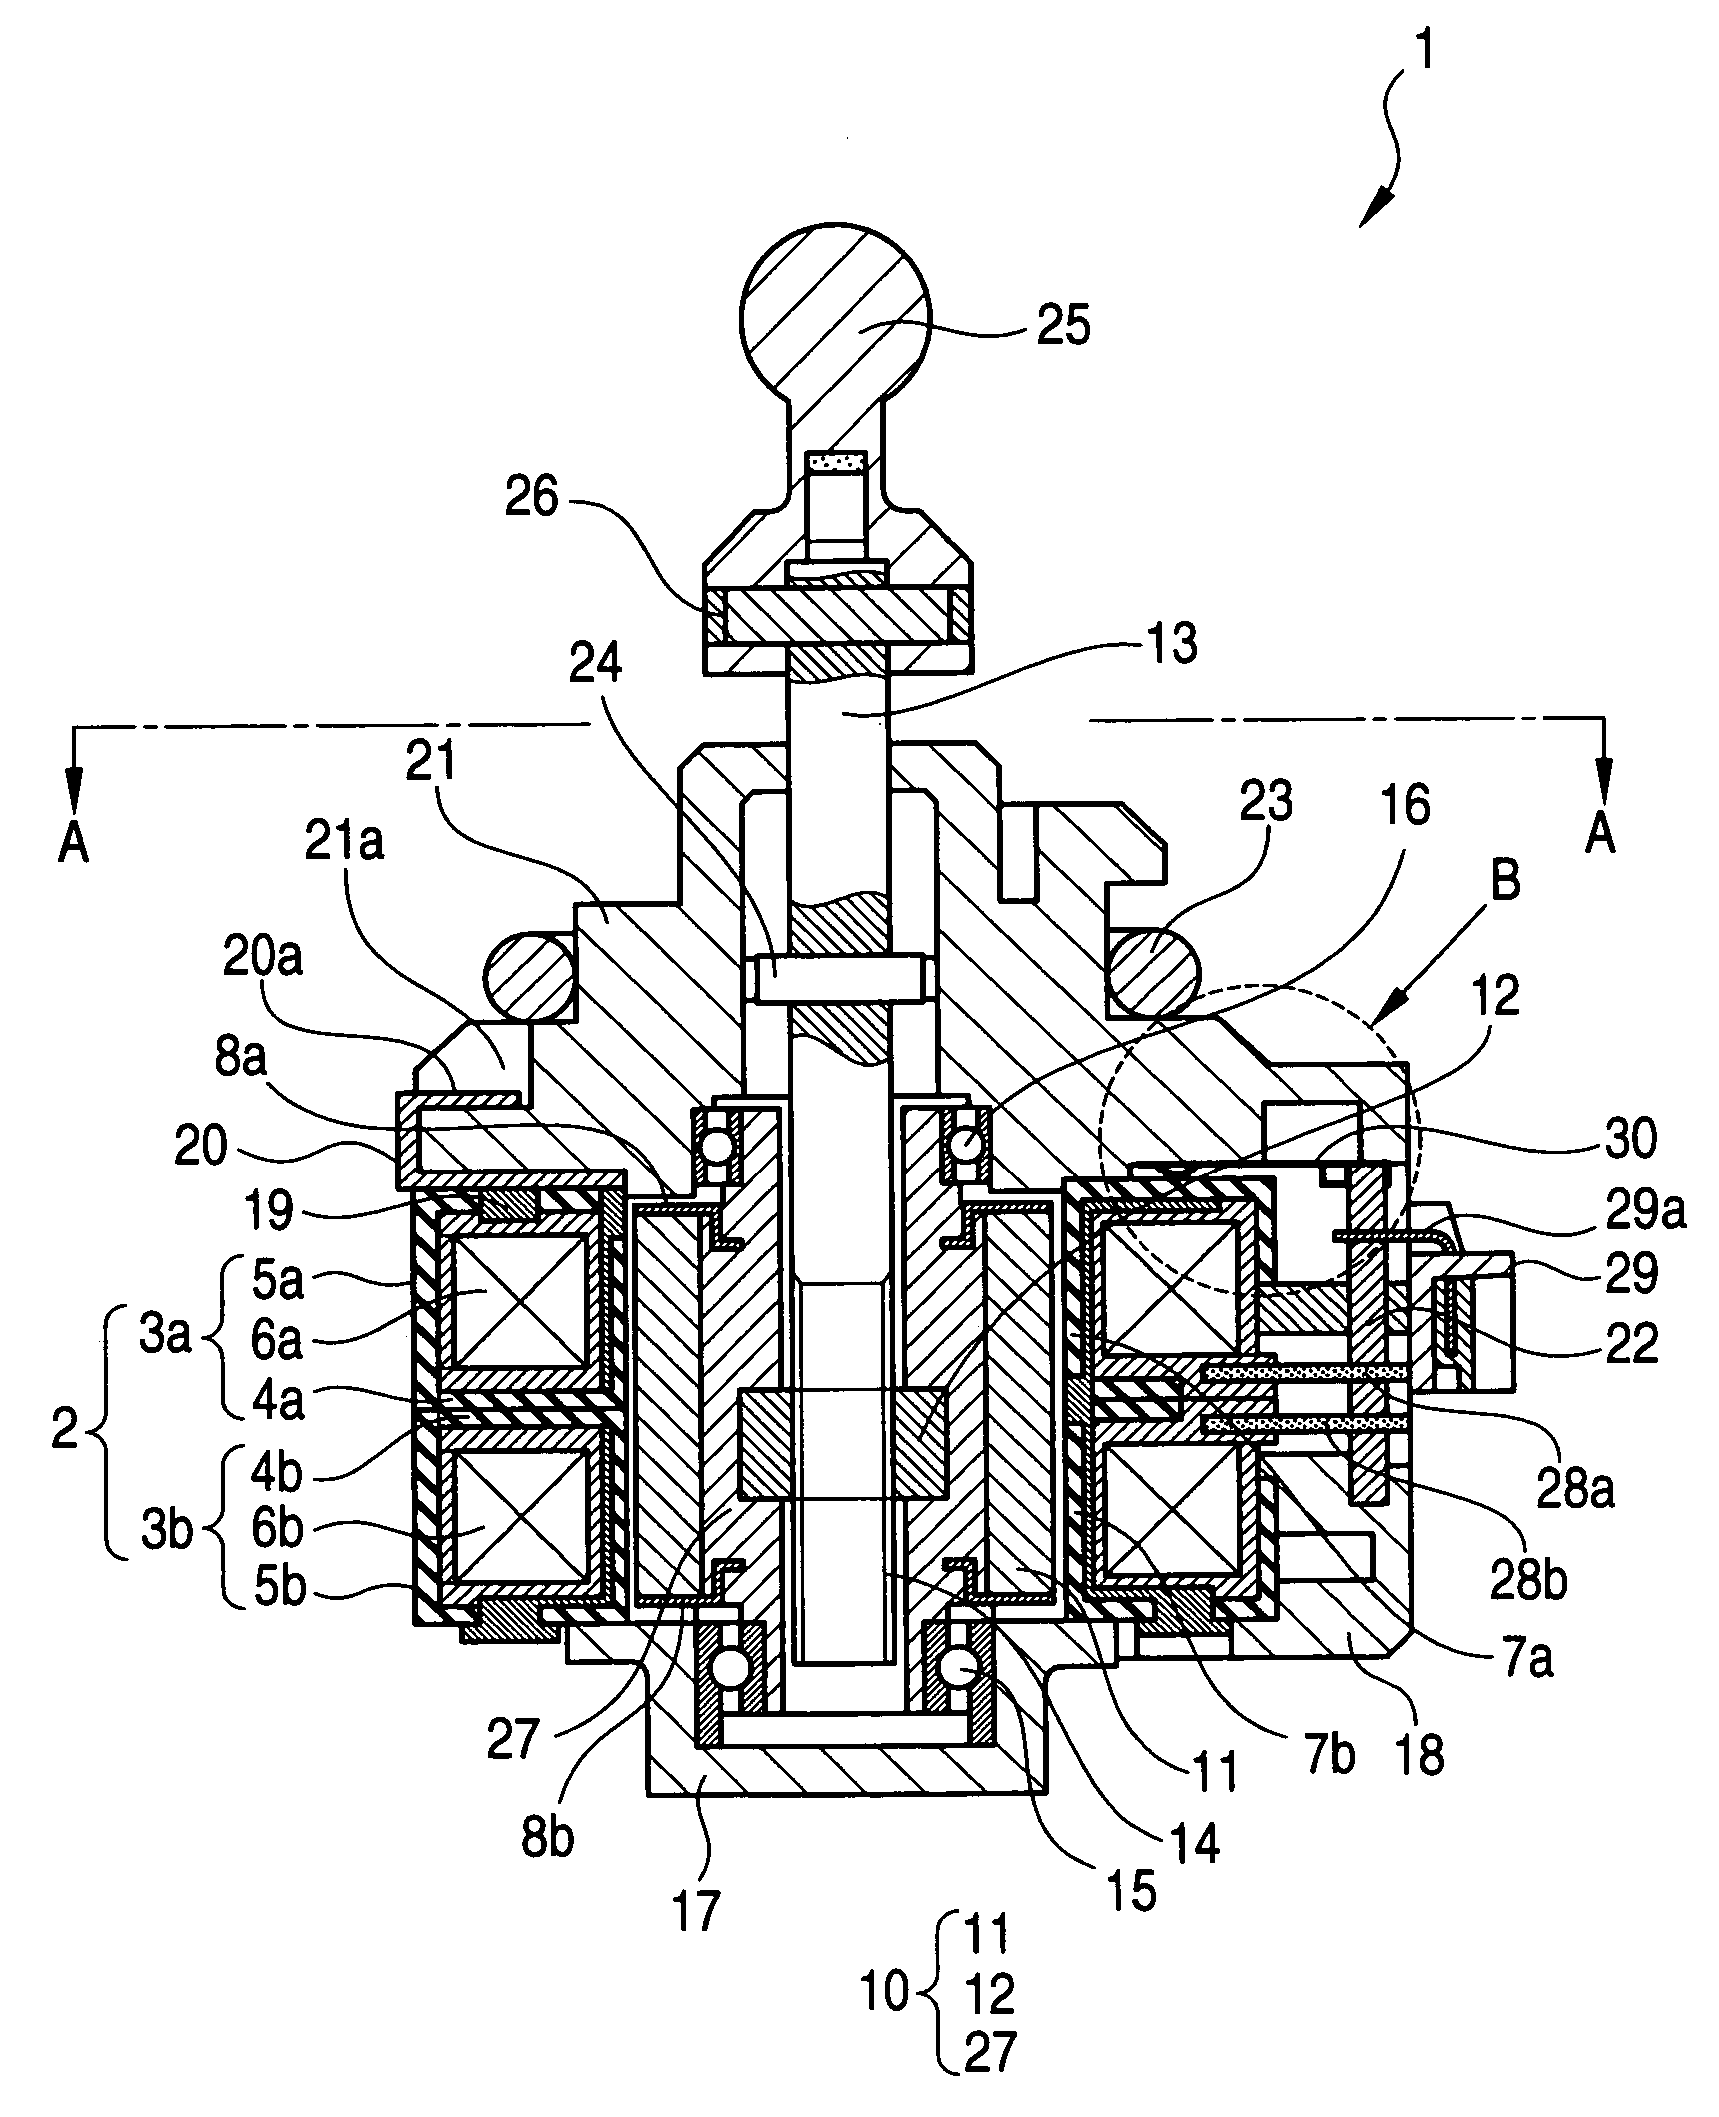 Actuator provided with grounding terminal